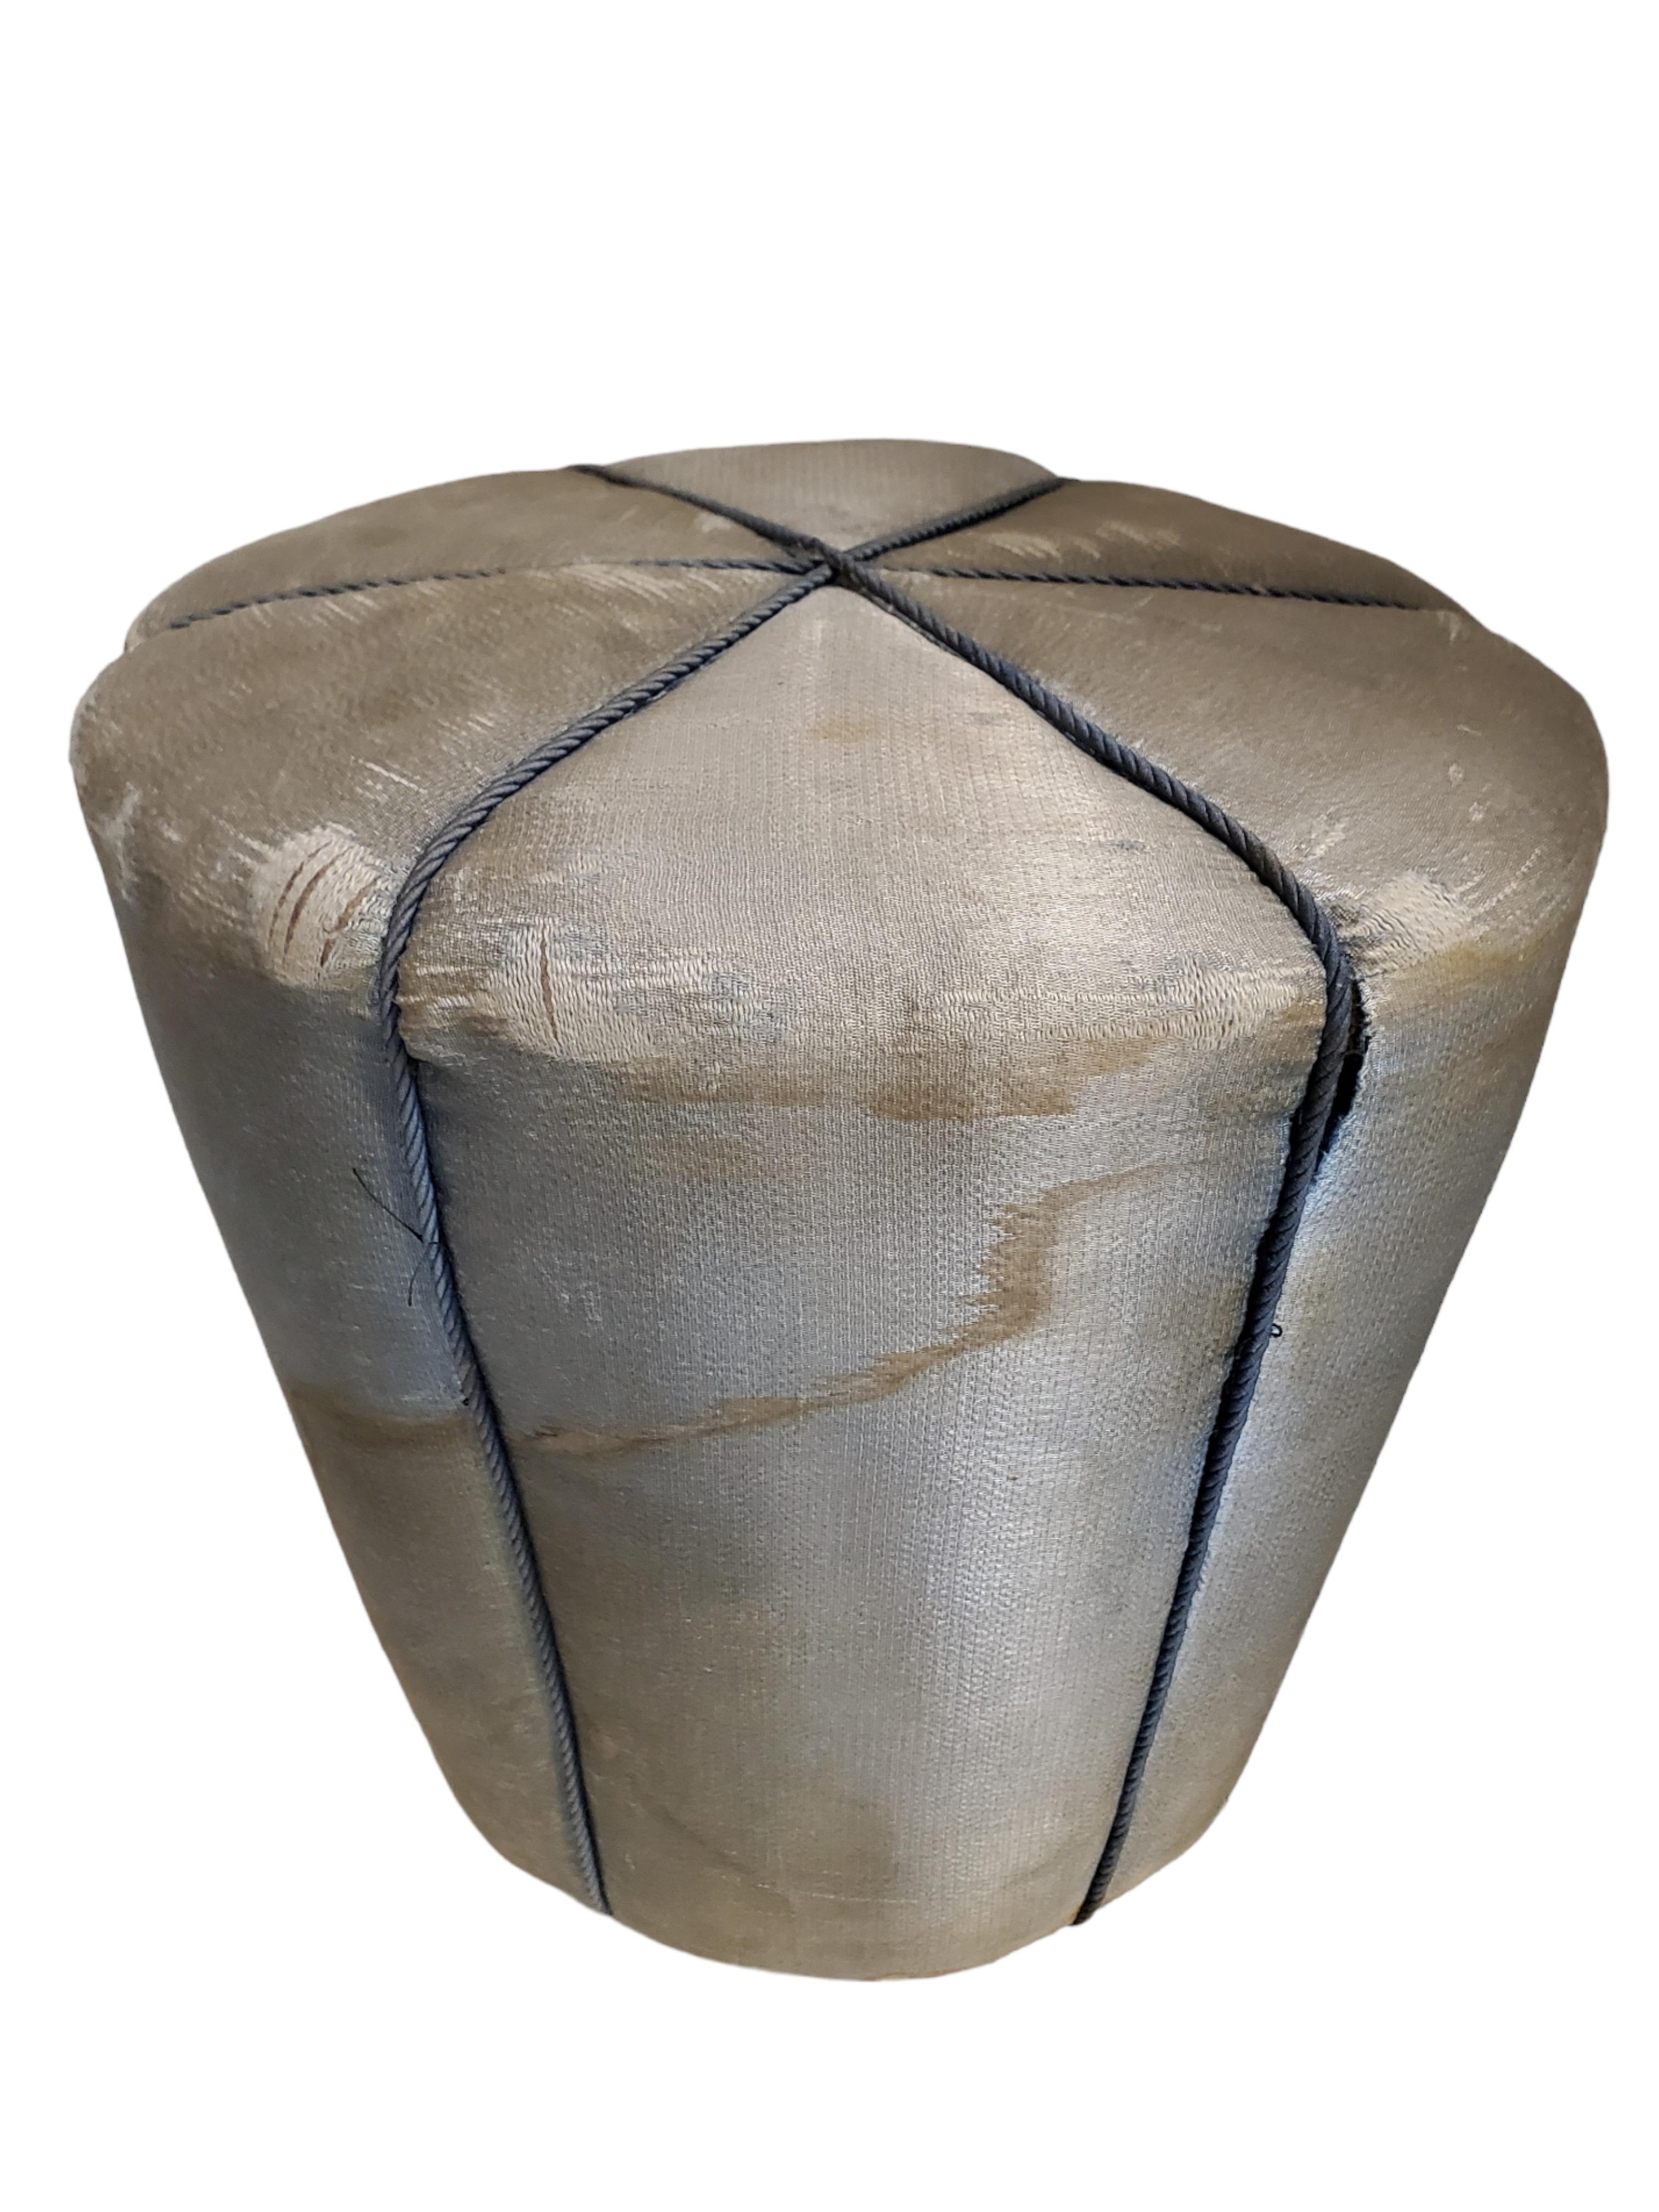  Vintage Art Deco Pouf Upholstered in Original Fabric- Jindrich Halabala In Fair Condition For Sale In New York City, NY